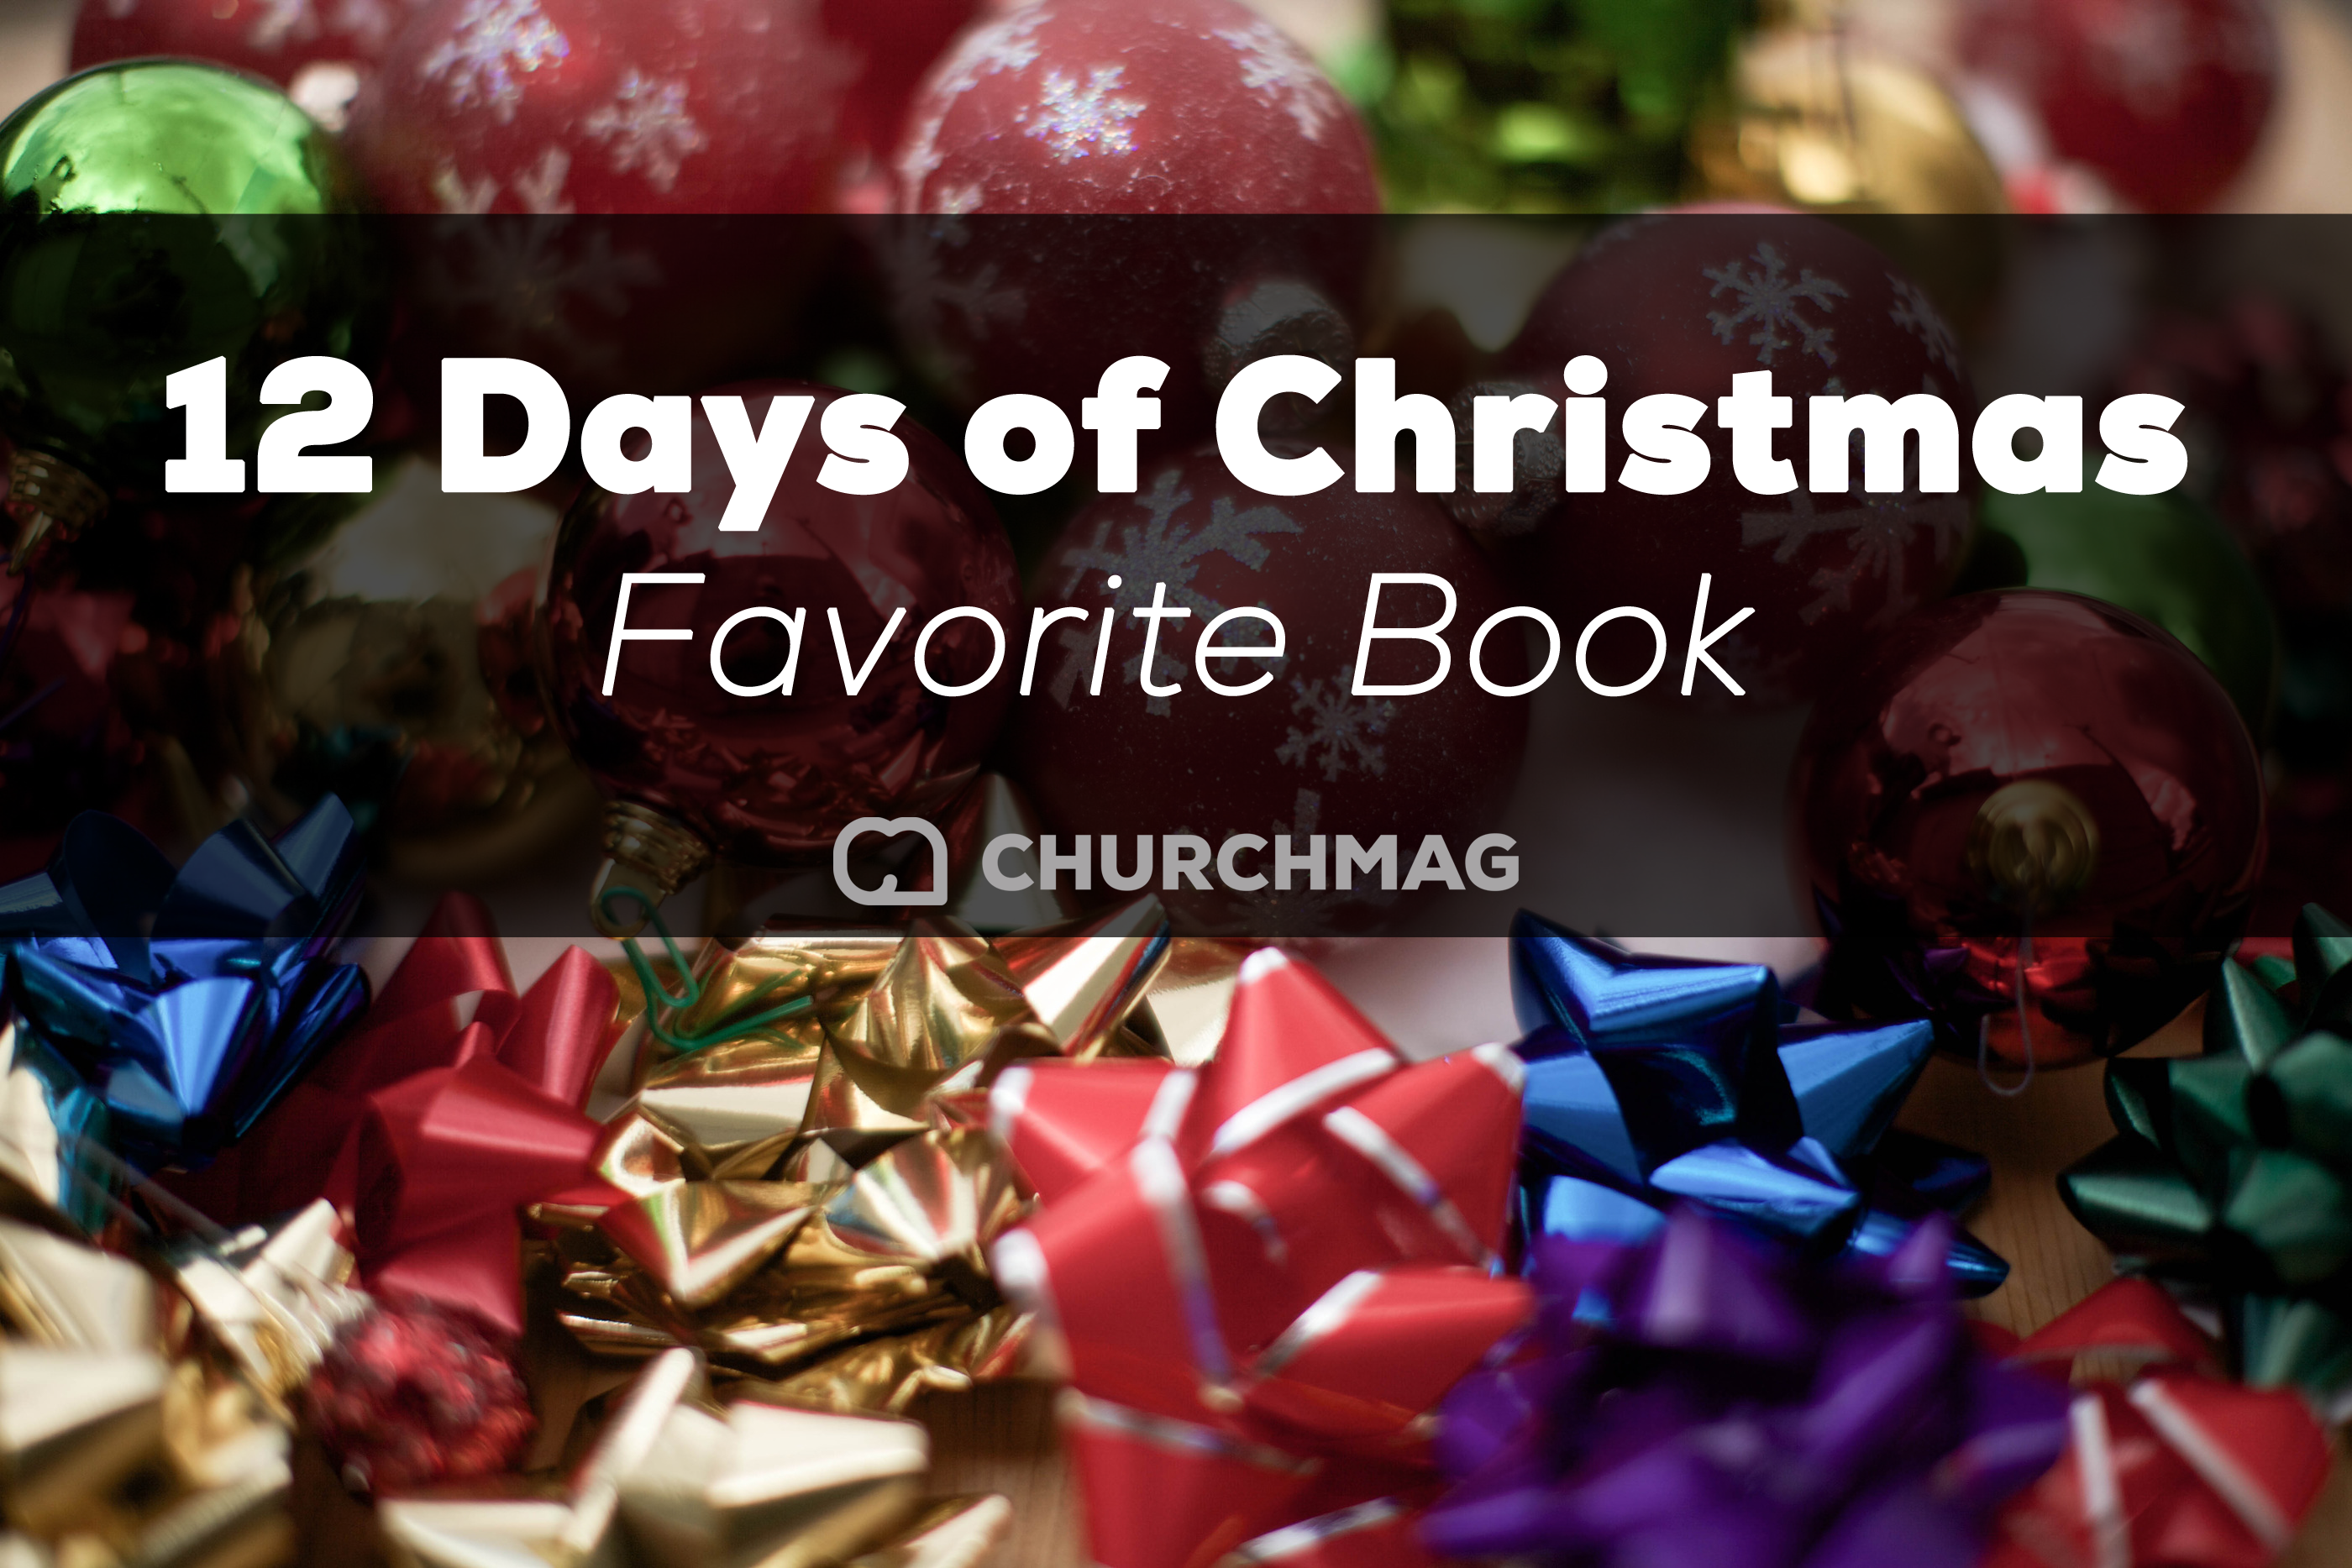 12 Days of Christmas: Favorite Book